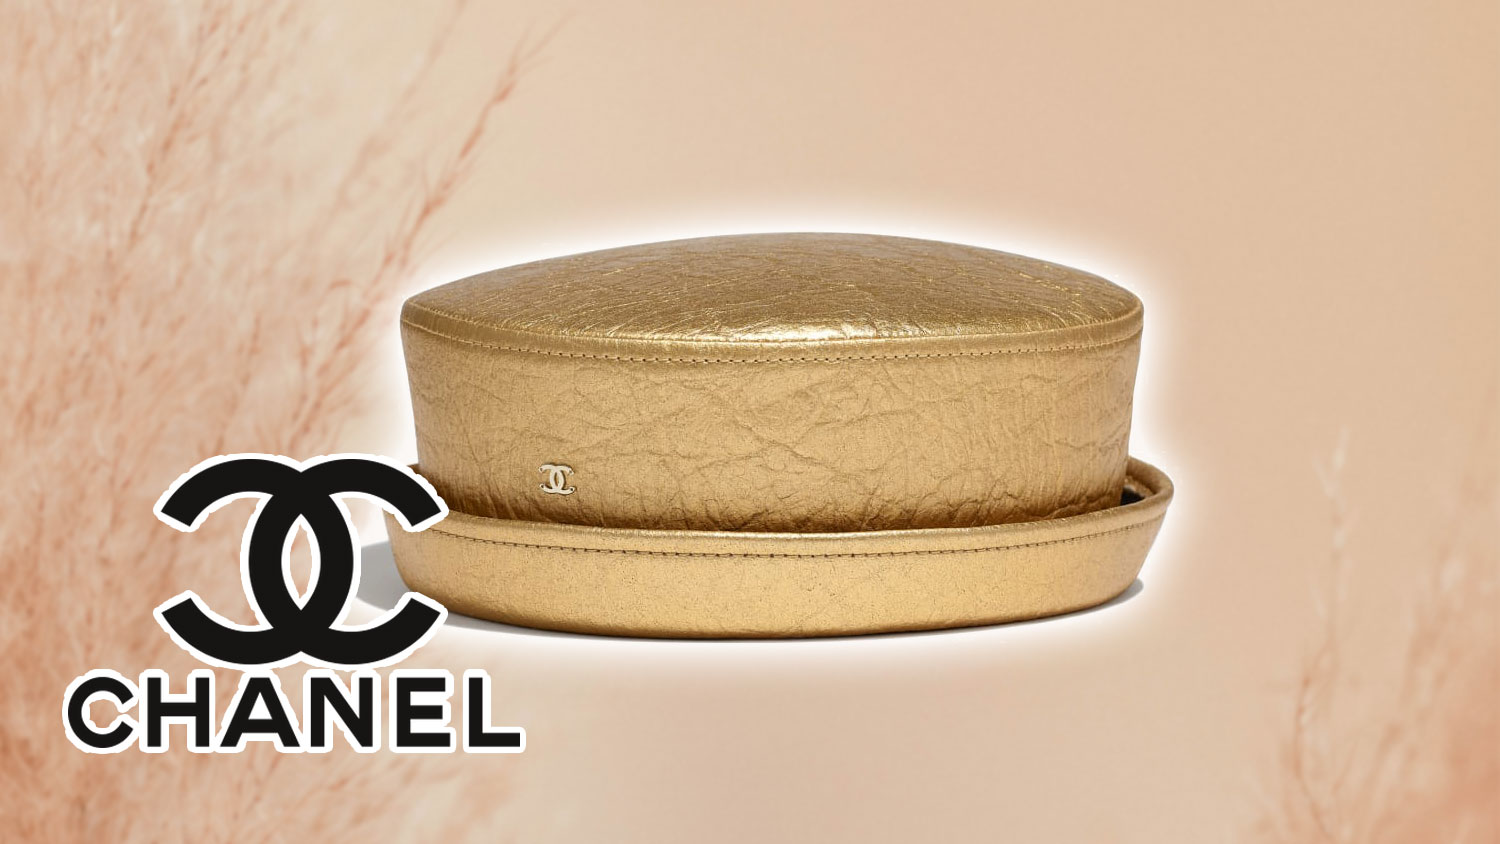 Chanel Makes a Gold Hat Out Of Pineapple Leather